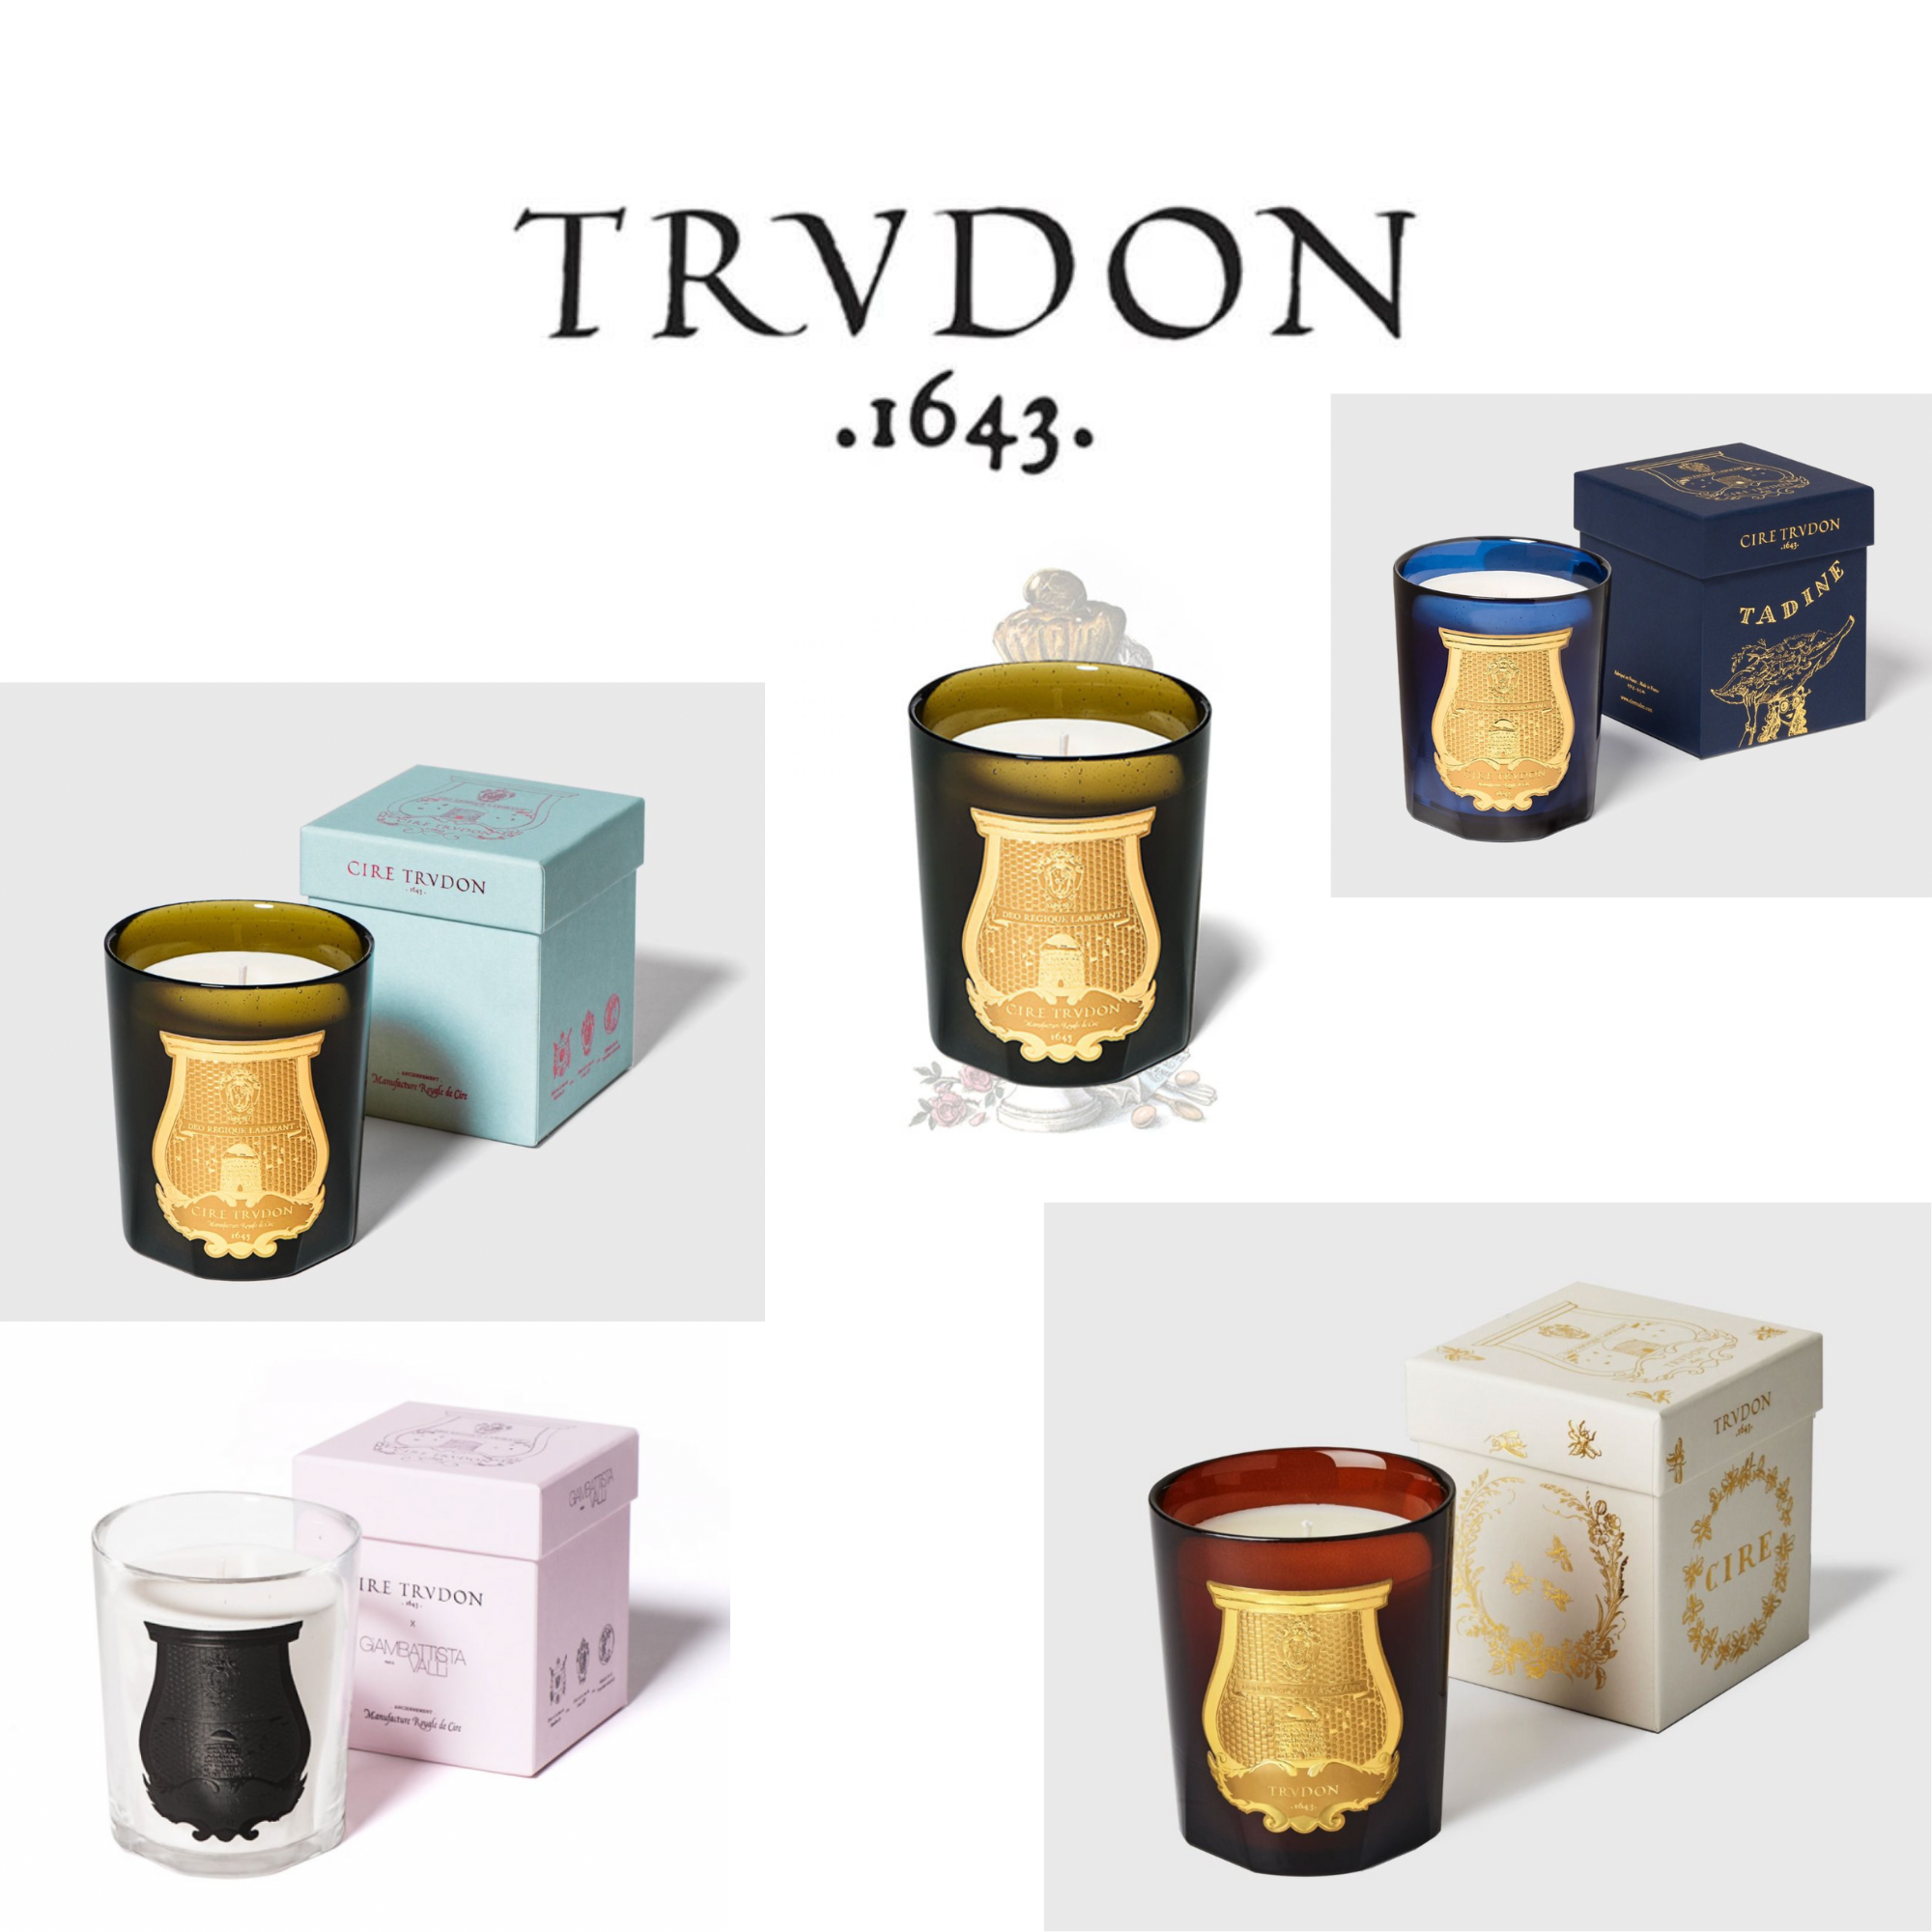 The 1st Giveaway, Trudon Candles